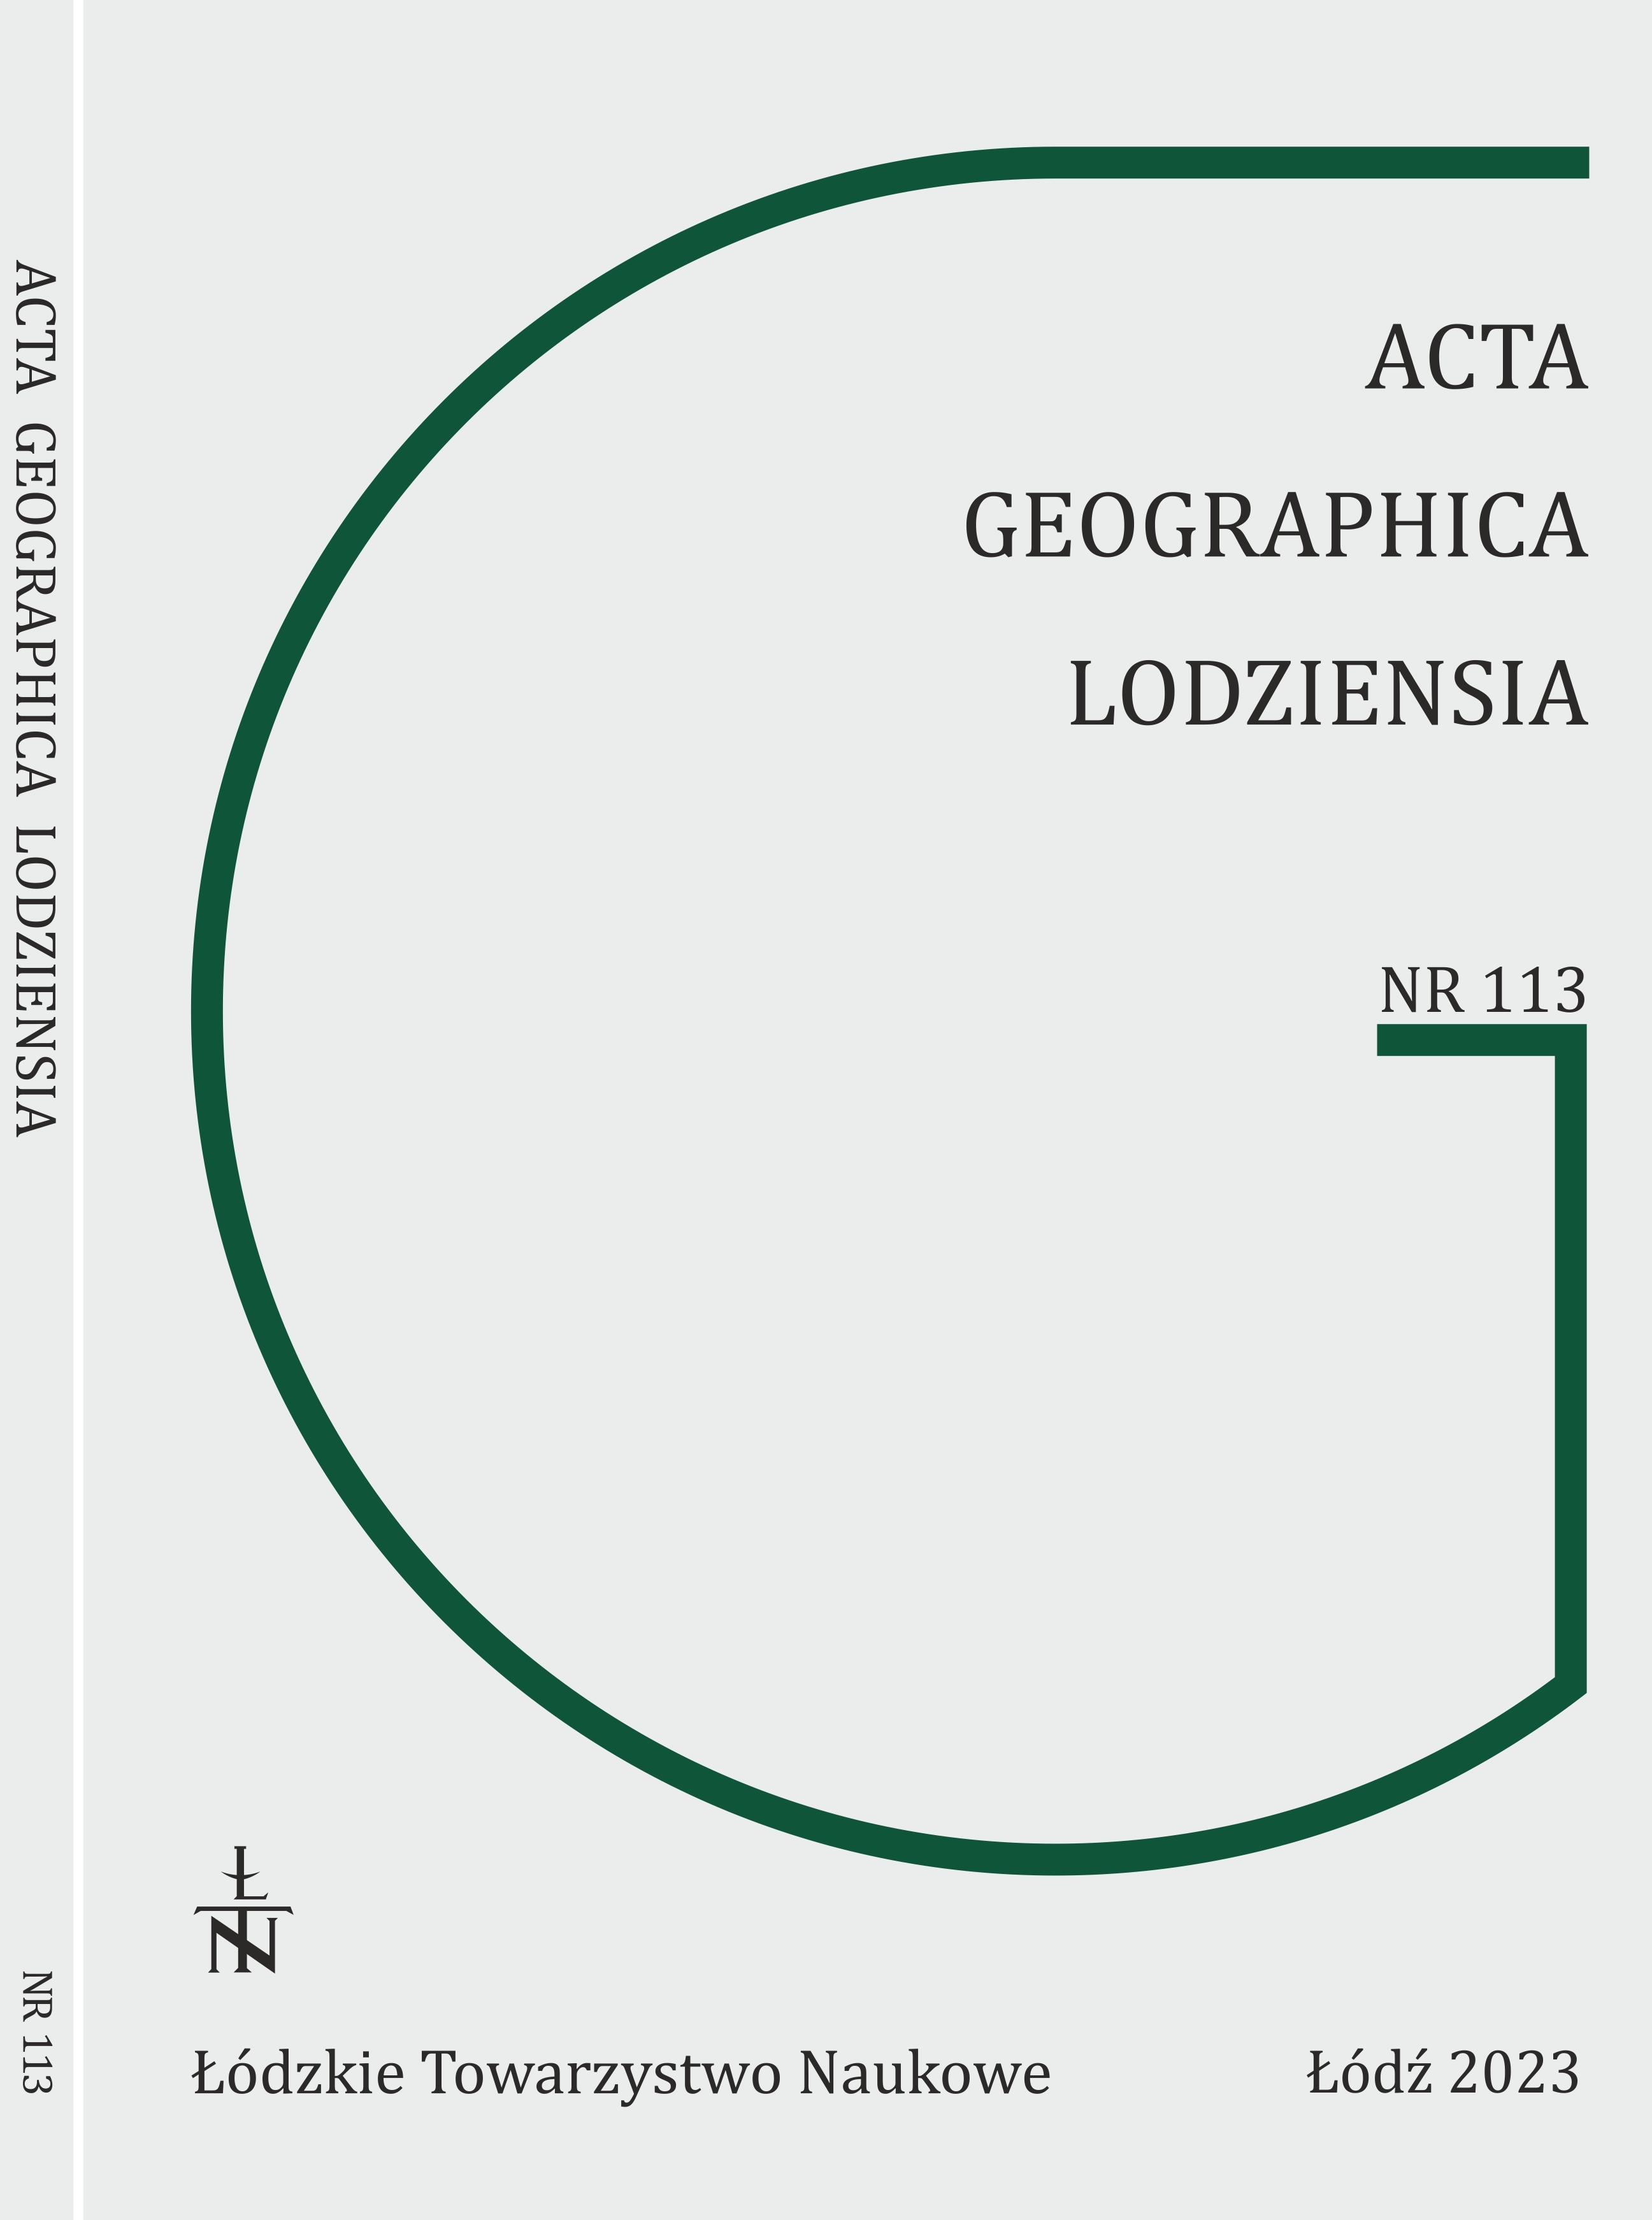 BIOGENIC SEDIMENTS OF PEATLANDS IN THE ŁÓDŹ REGION
AS MATERIAL FOR RESEARCH ON FOSSIL CLADOCERA Cover Image